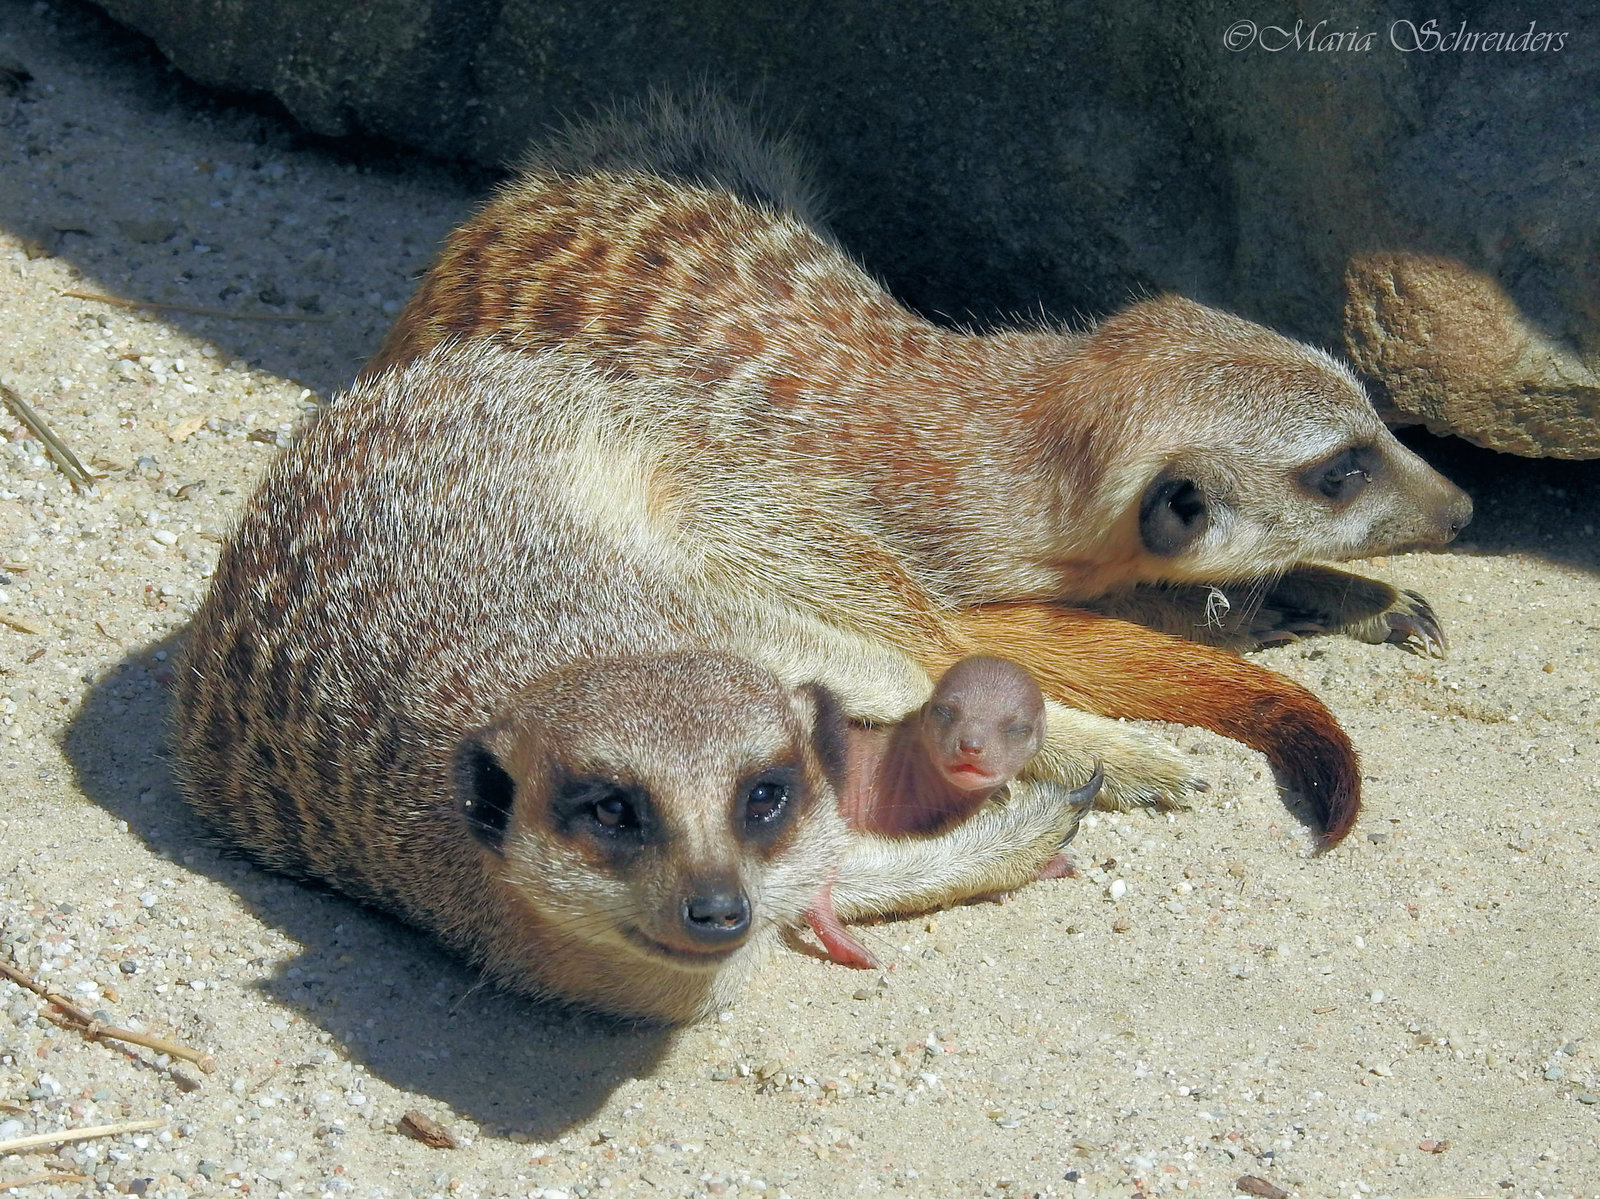 meerkat_with_young_one_by_maria_schreuders-dbjiva6.jpg